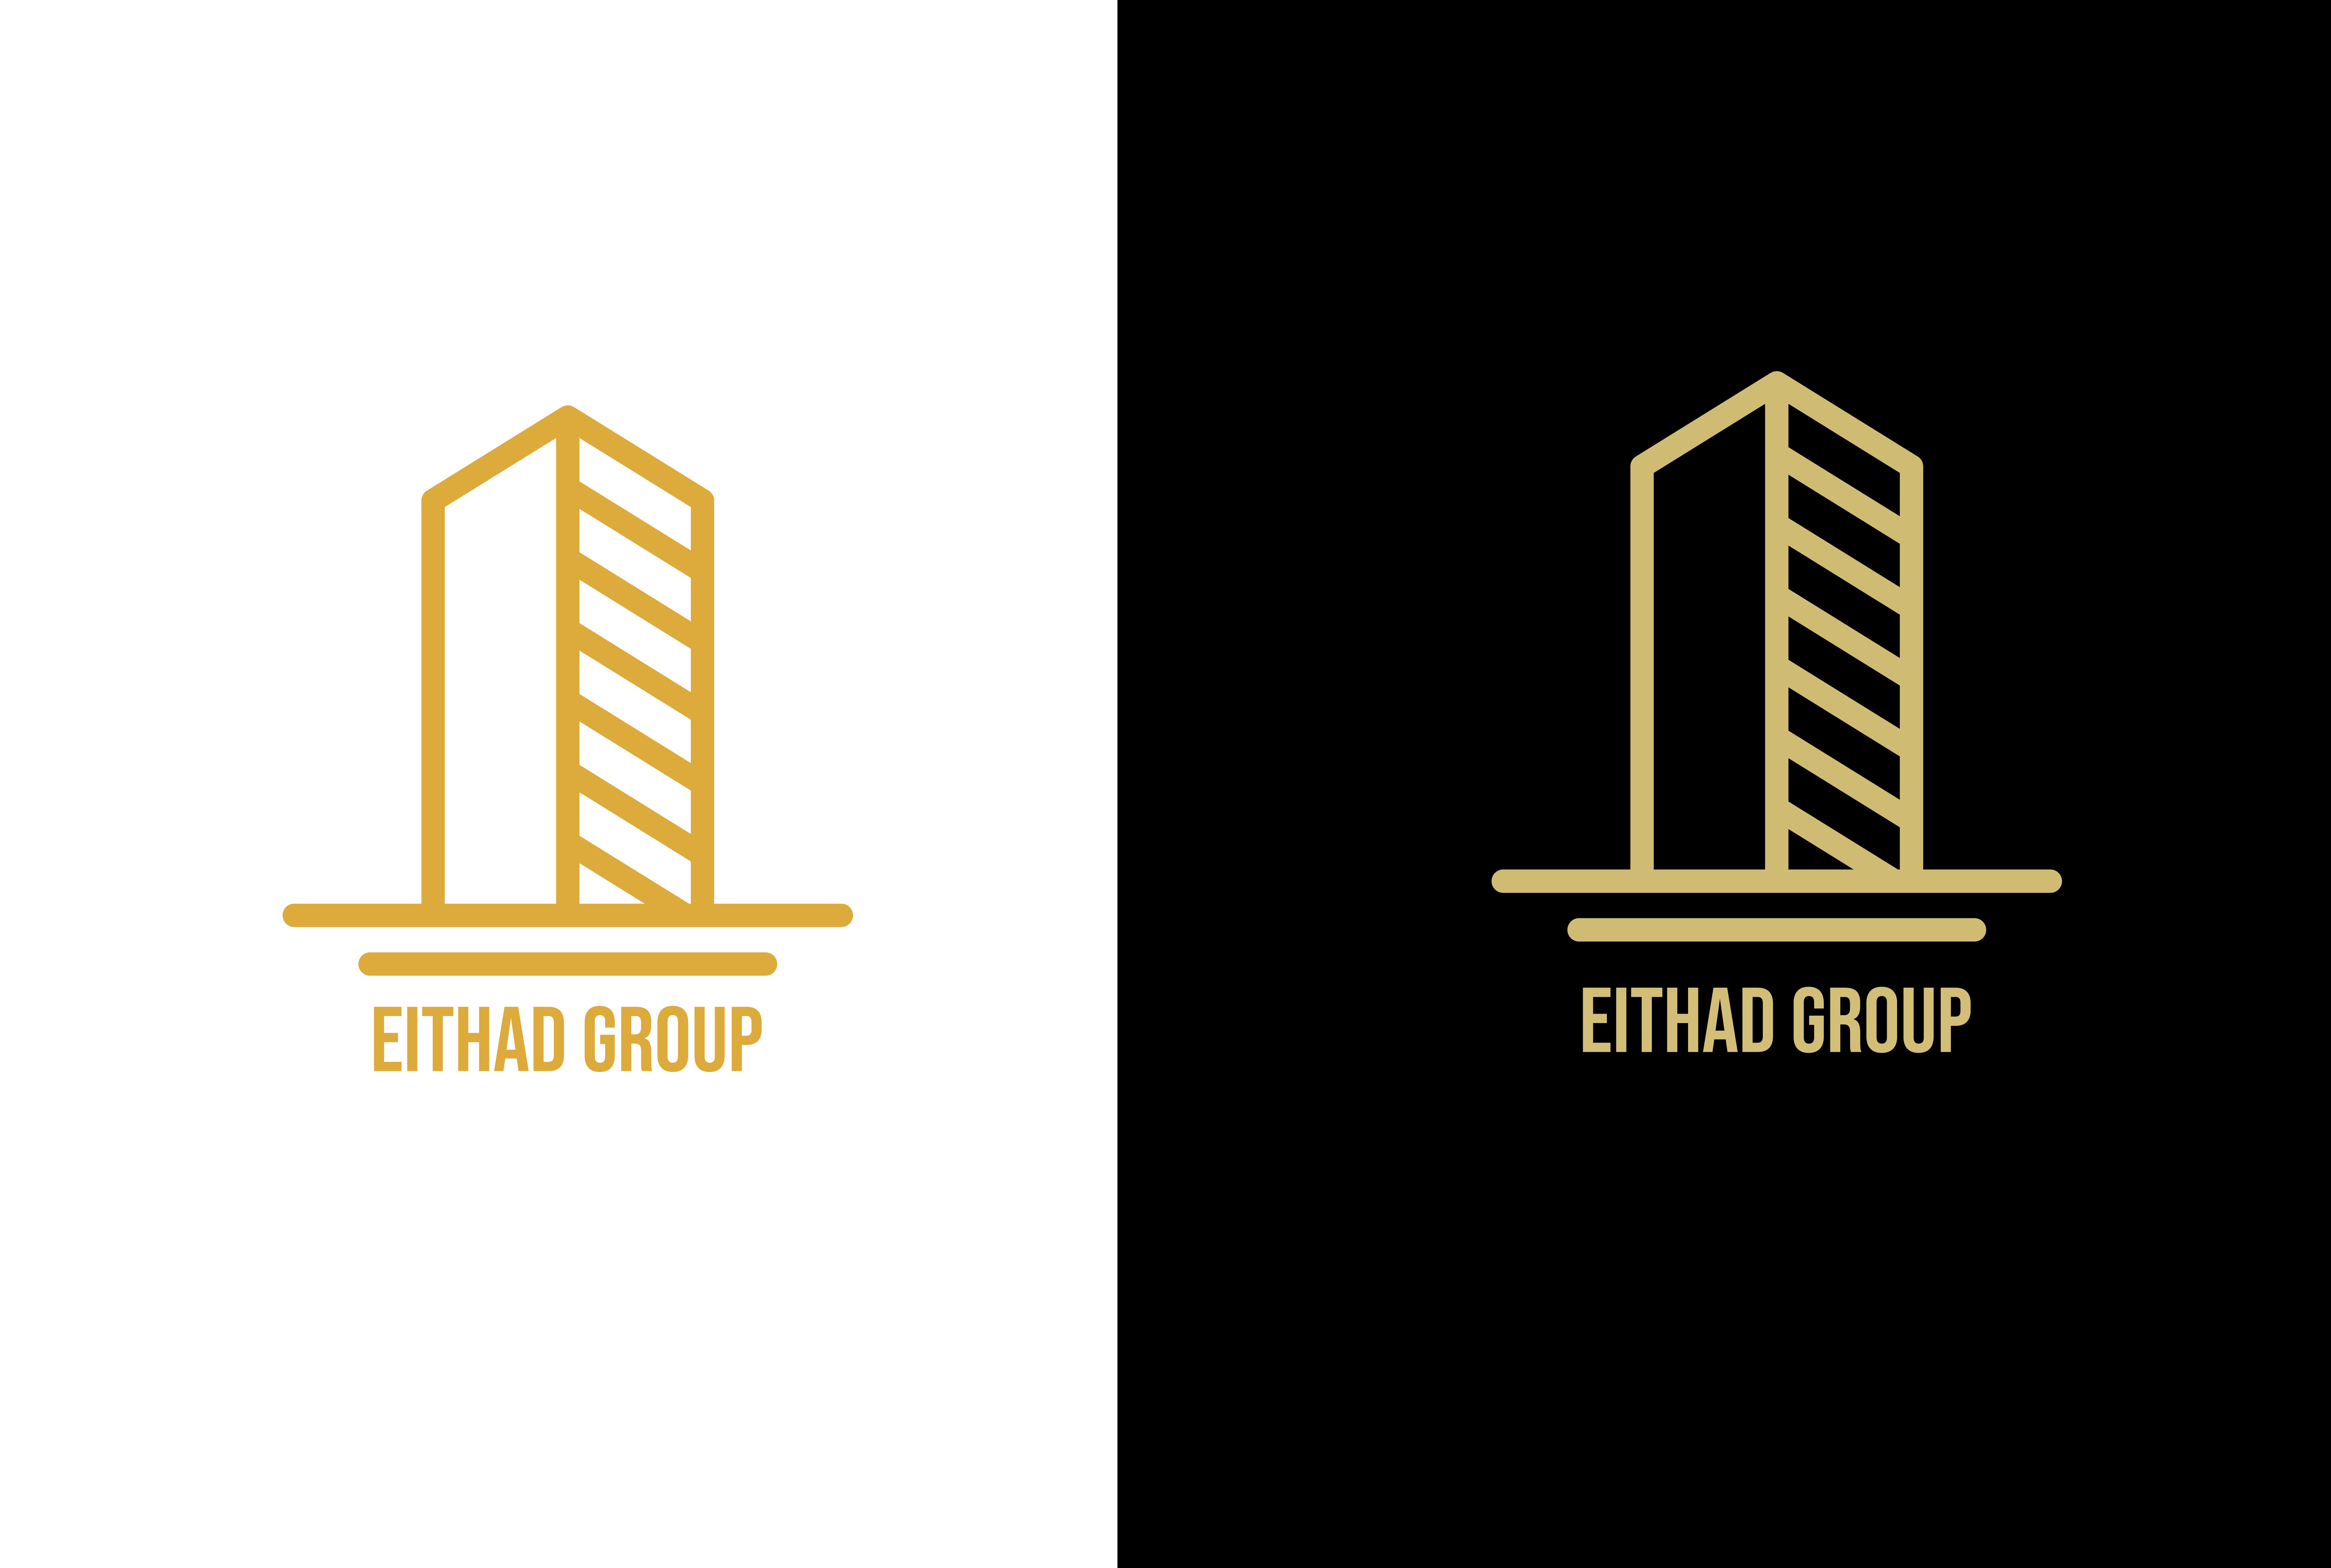 I Will design flat/minimalist logo for your business or company for $10